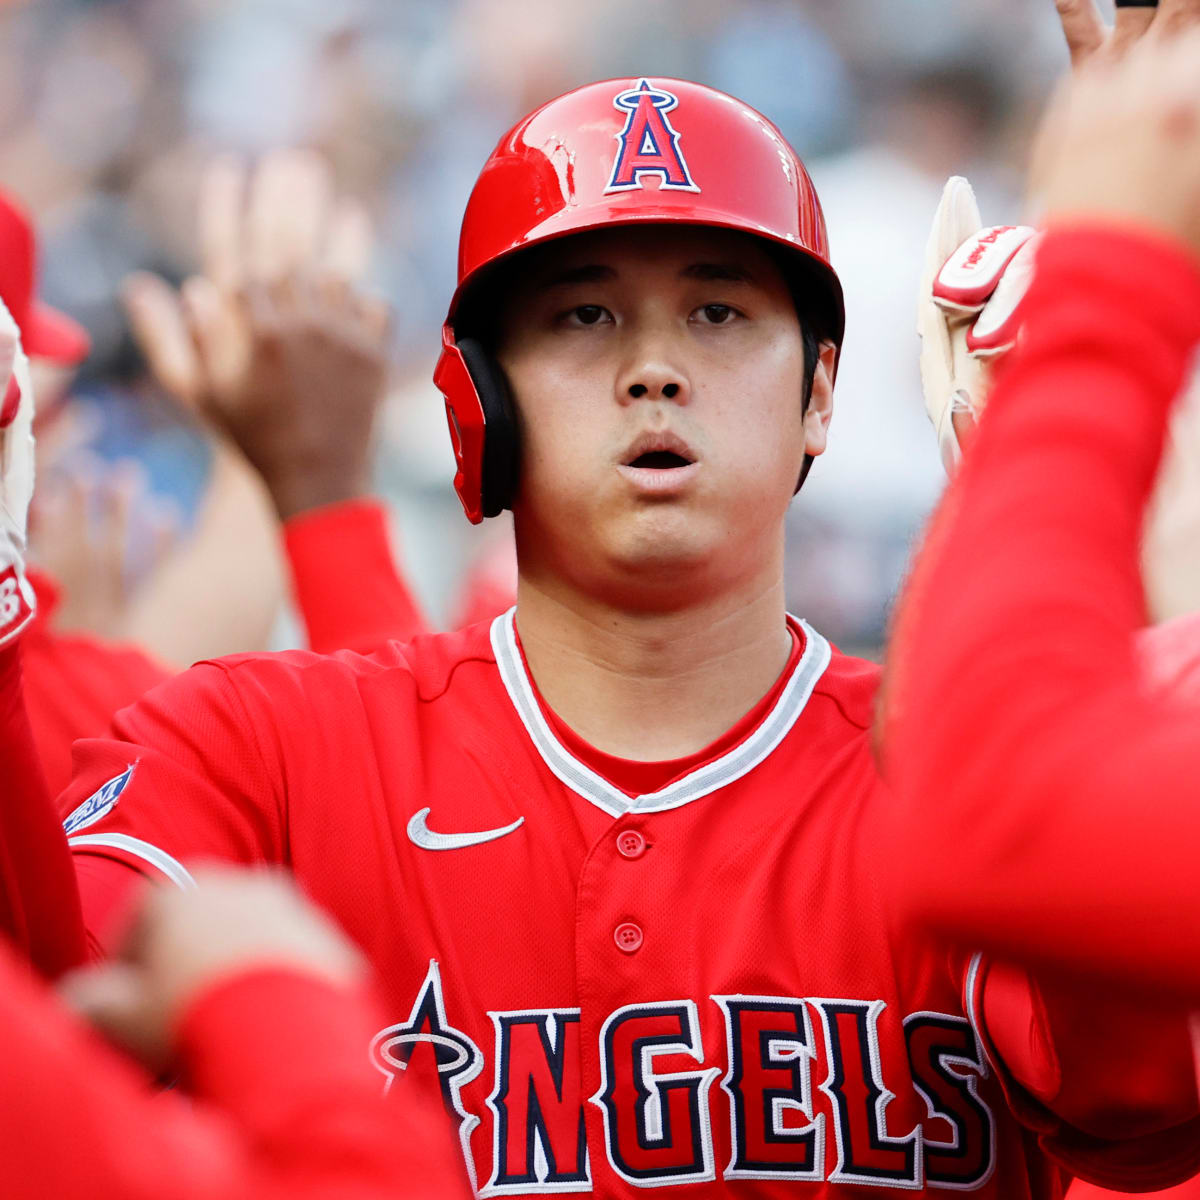 Should Blue Jays go all-in for Shohei Ohtani trade?